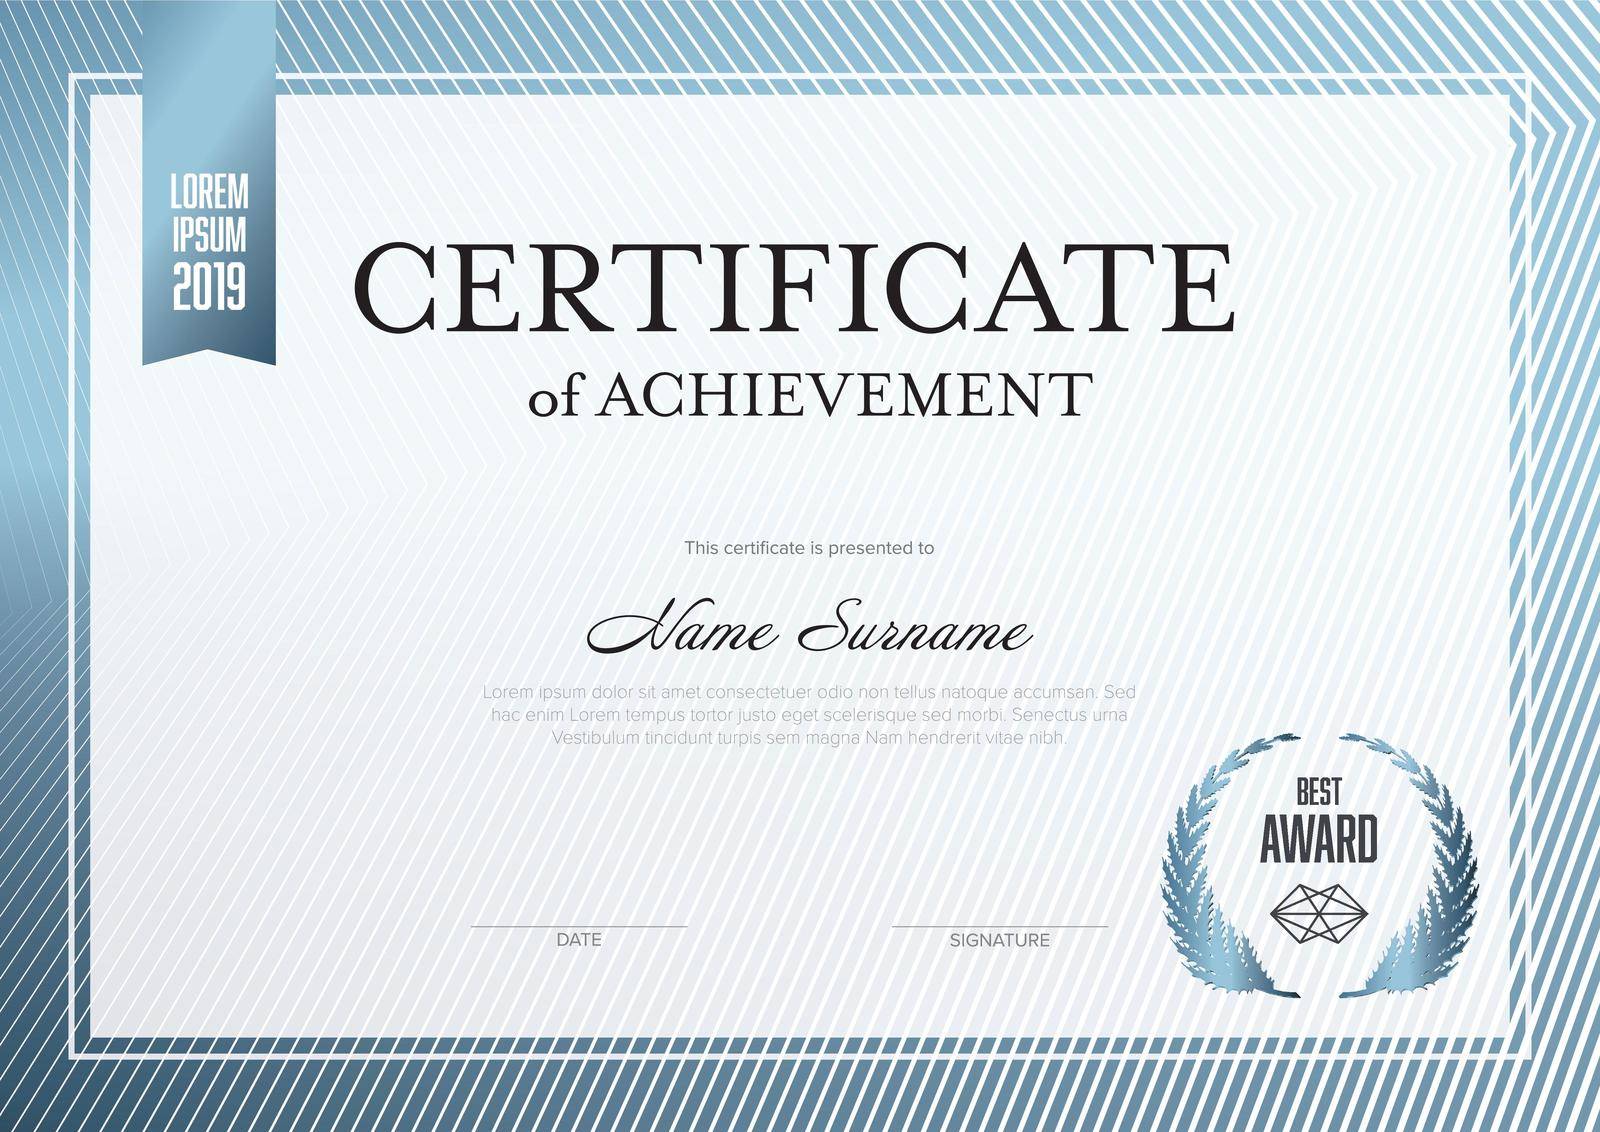 Modern certificate of achievement template with place for your content - metallic blue design. Light white blue layout template for any premium certificate, diploma, graduation or achievement document for print